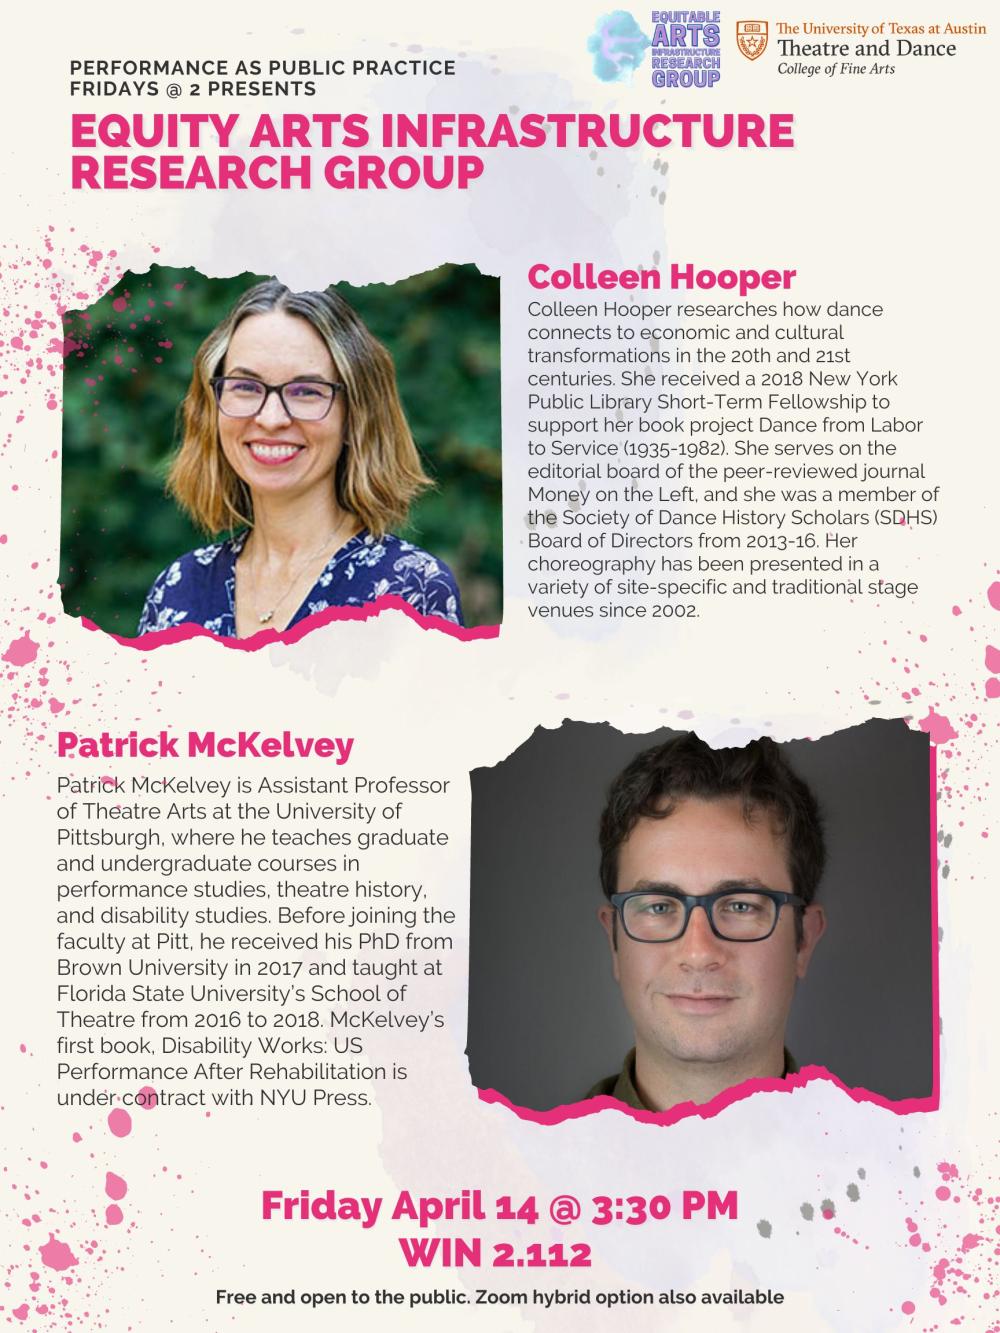 Headshots and bios for Equitable Arts Infrastructure Research Group members Colleen Hooper and Patrick McKelvey